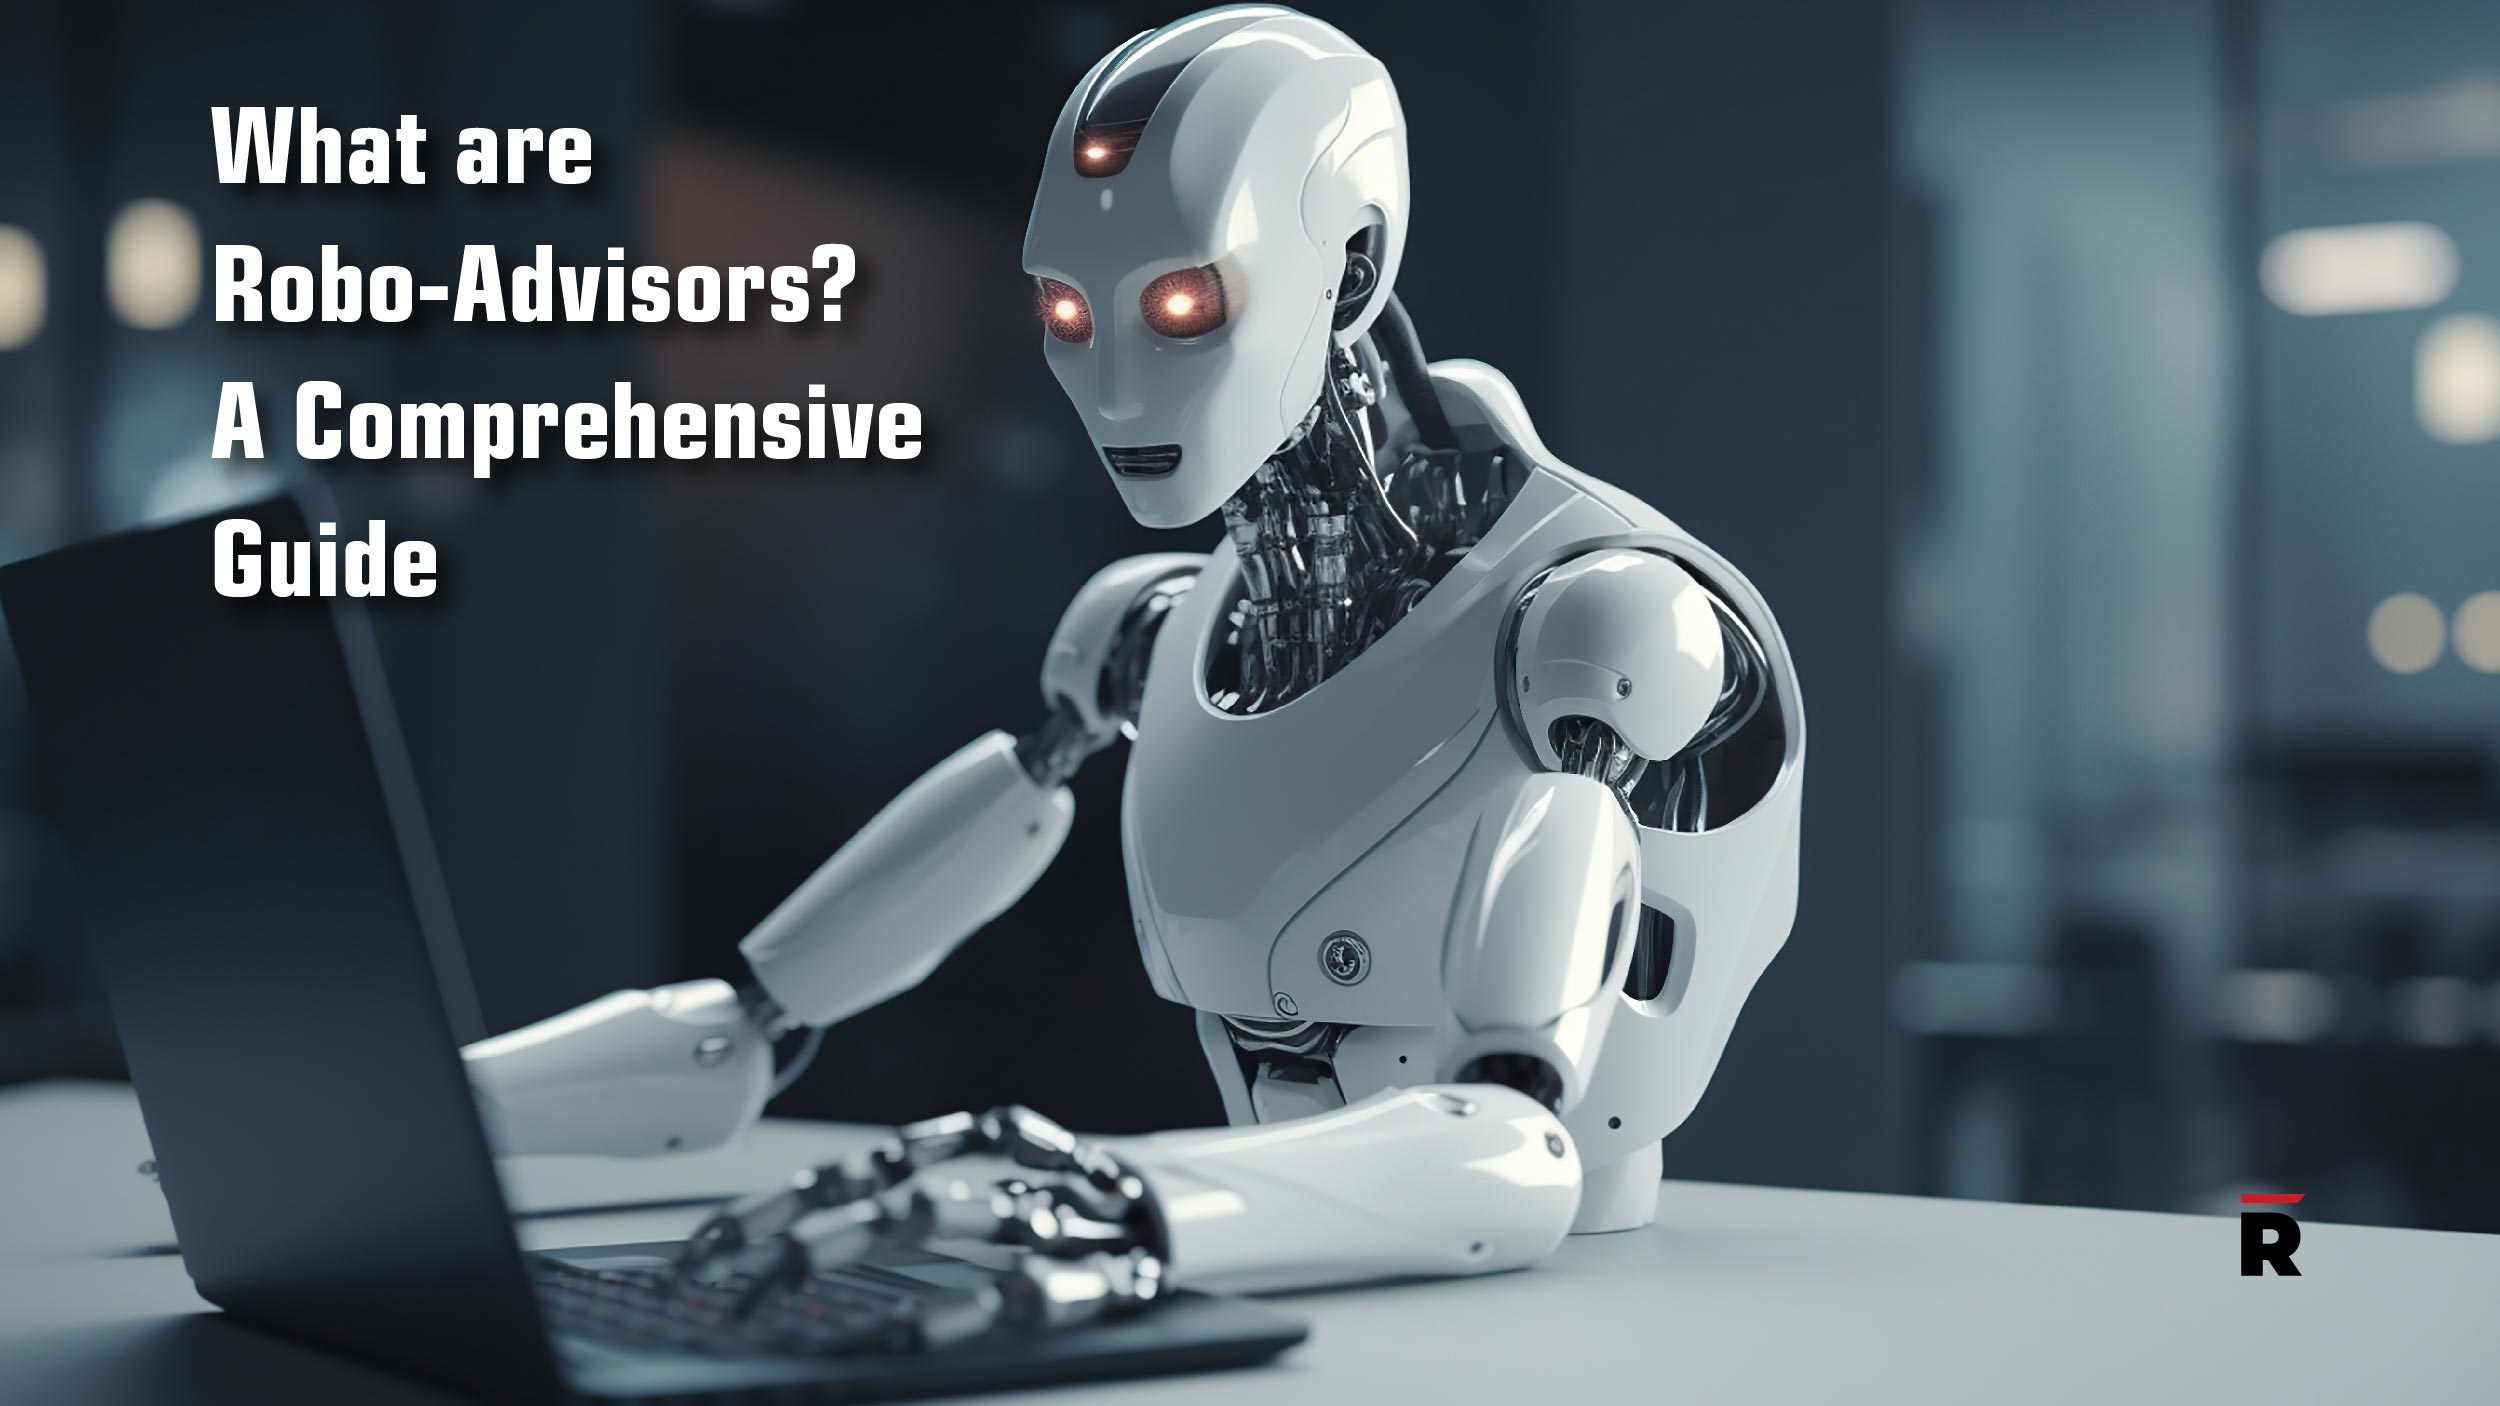 What are Robo-Advisors? A Comprehensive Guide